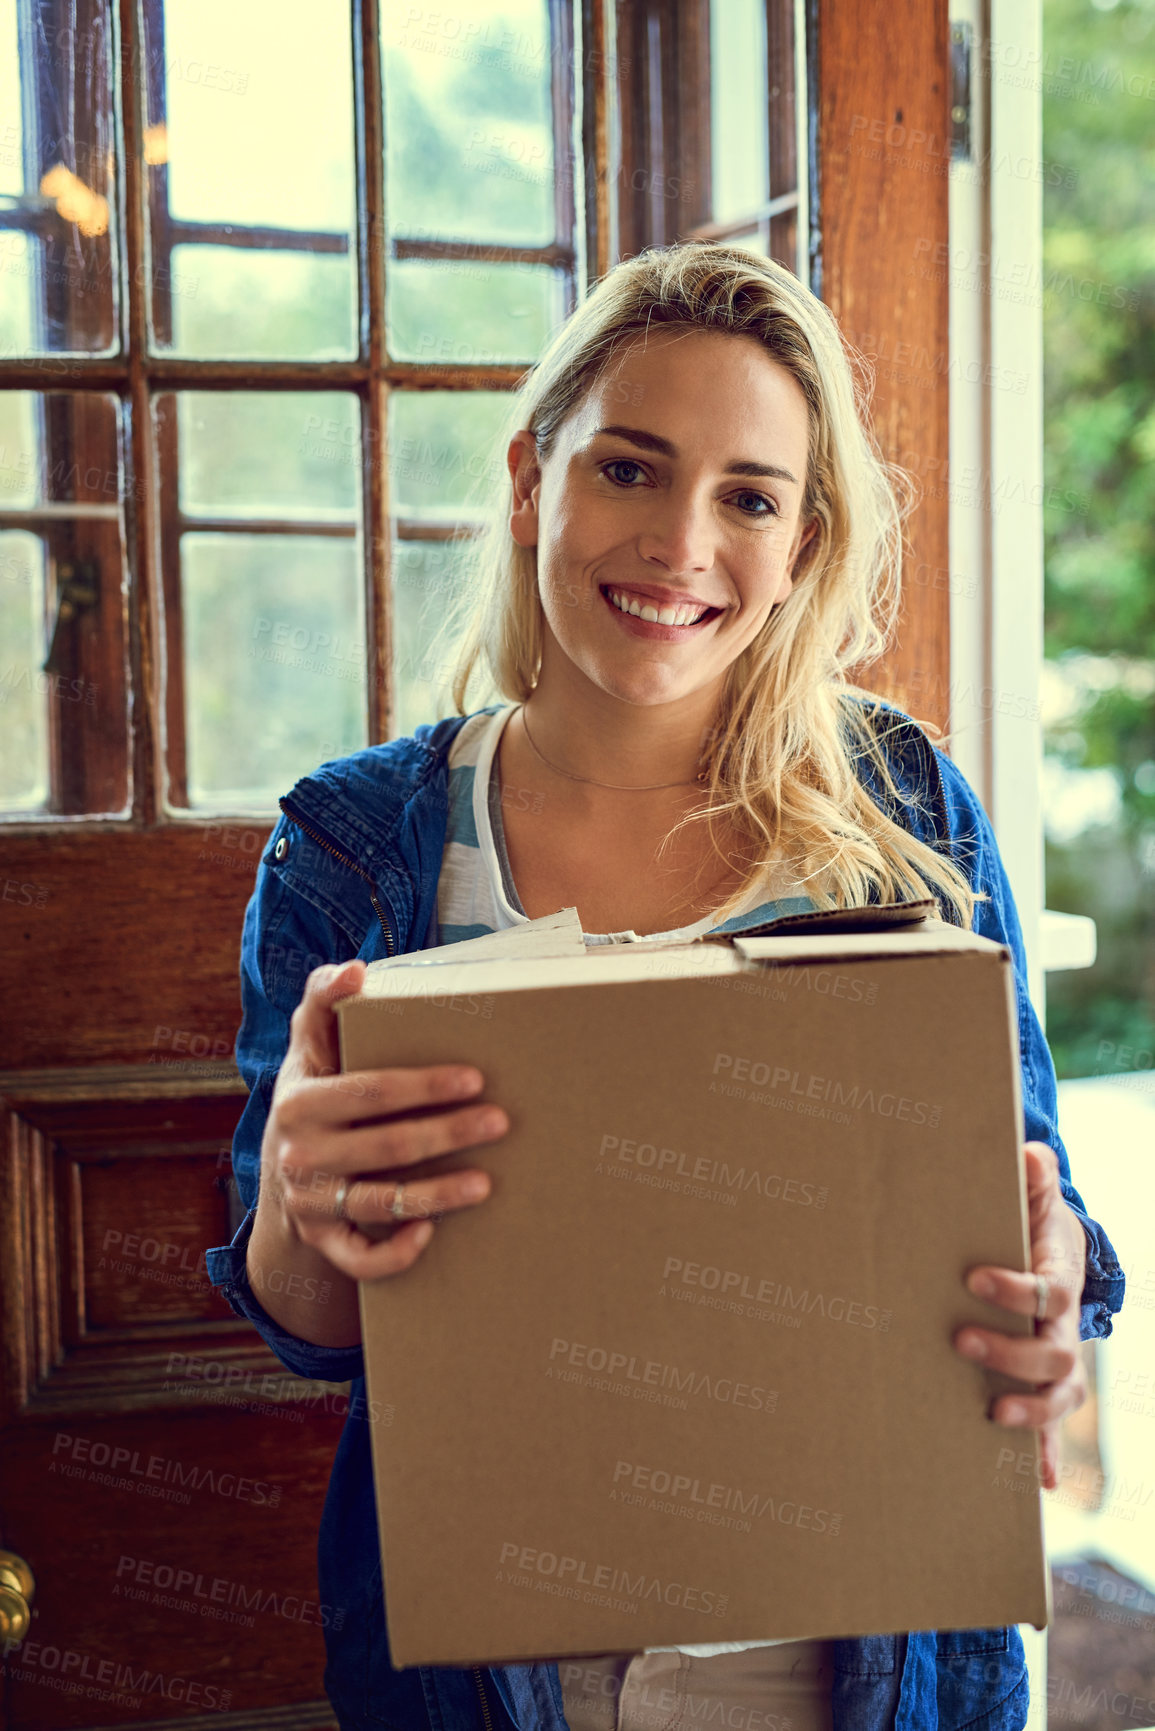 Buy stock photo Portrait of a young woman holding a box while moving house